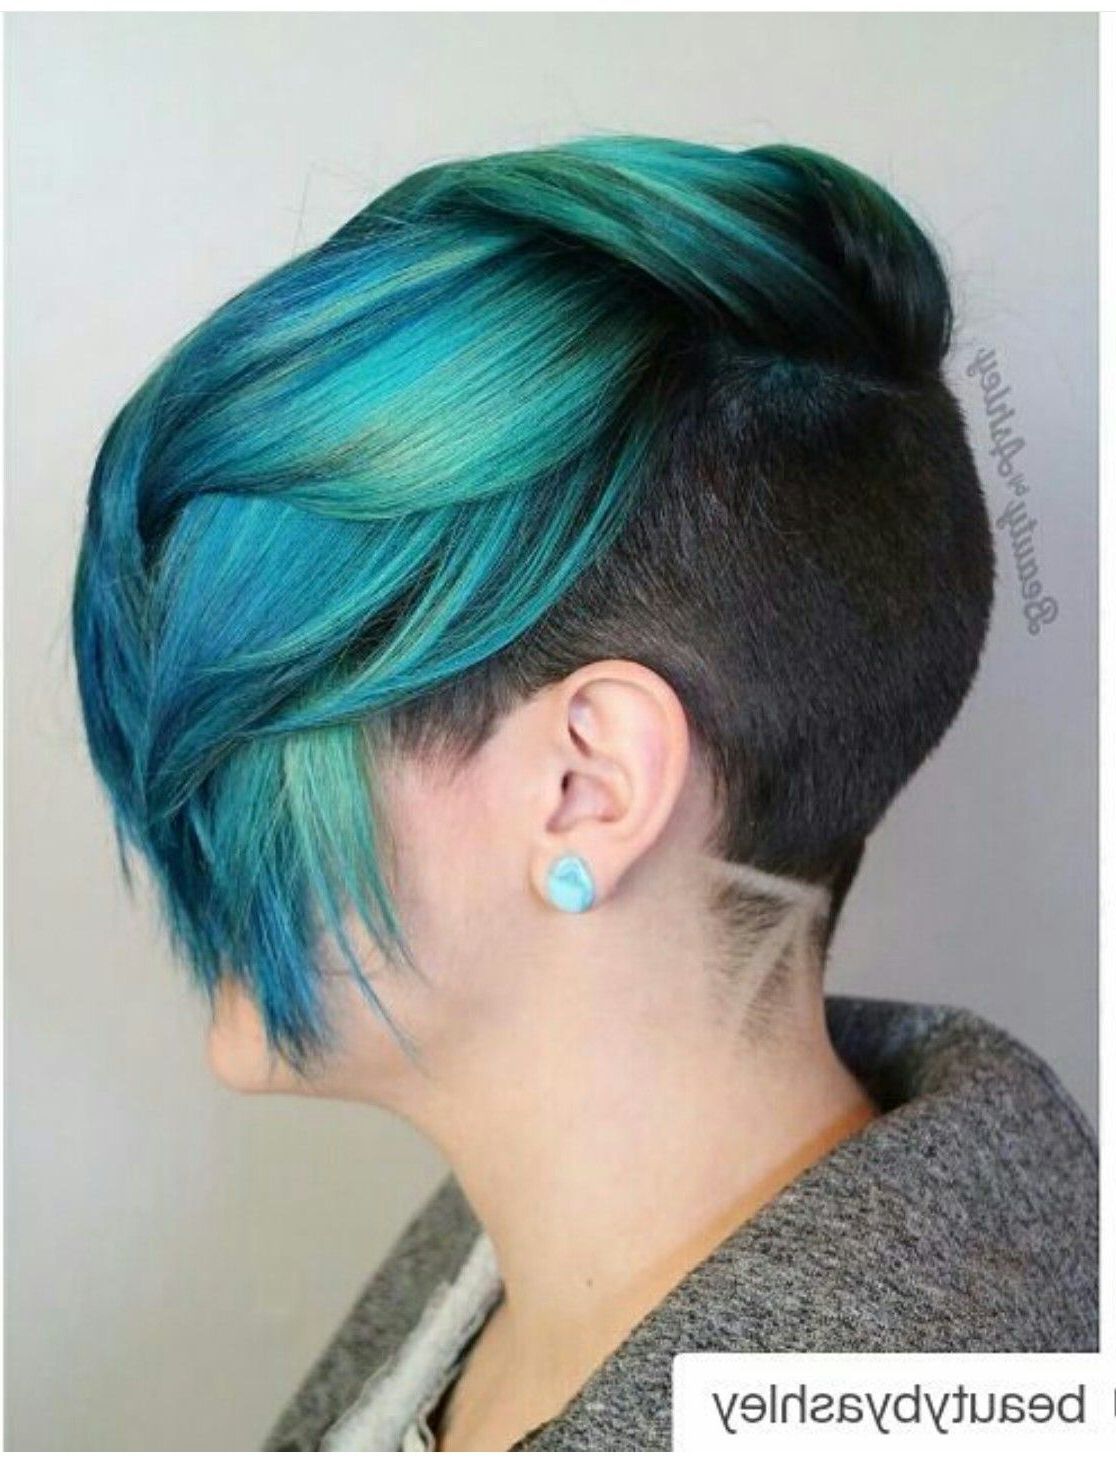 Find Out Full Gallery Of Unique Short Hairstyles Women Shaved Sides With Short Hairstyles With Shaved Sides (View 10 of 25)